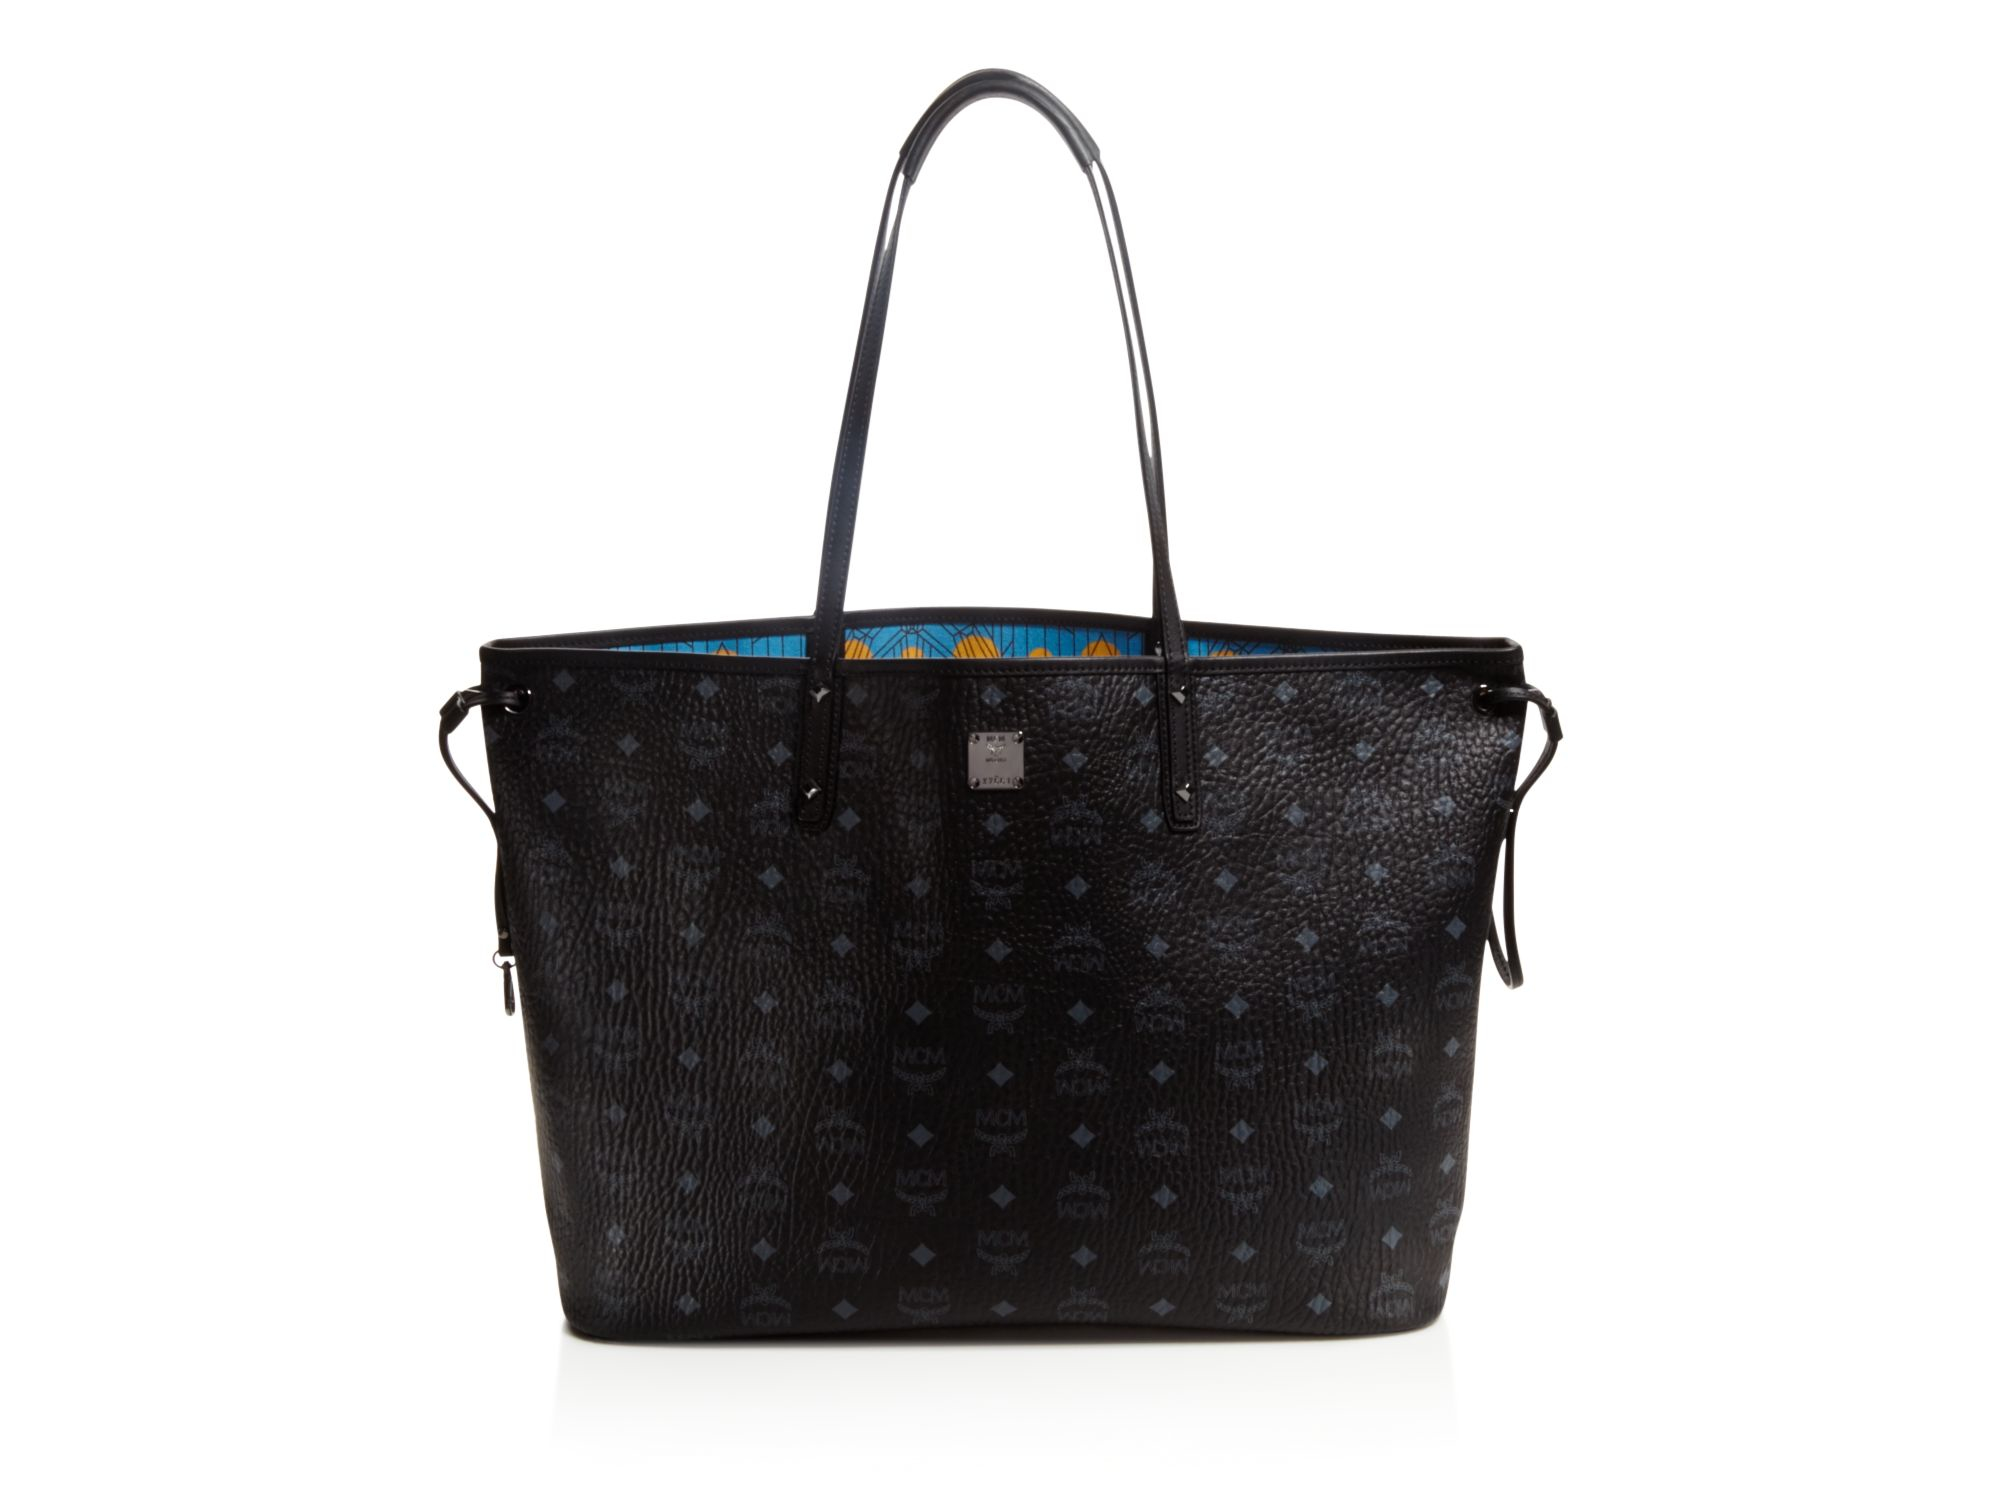 Lyst - Mcm Large Reversible Project Visetos Tote in Black